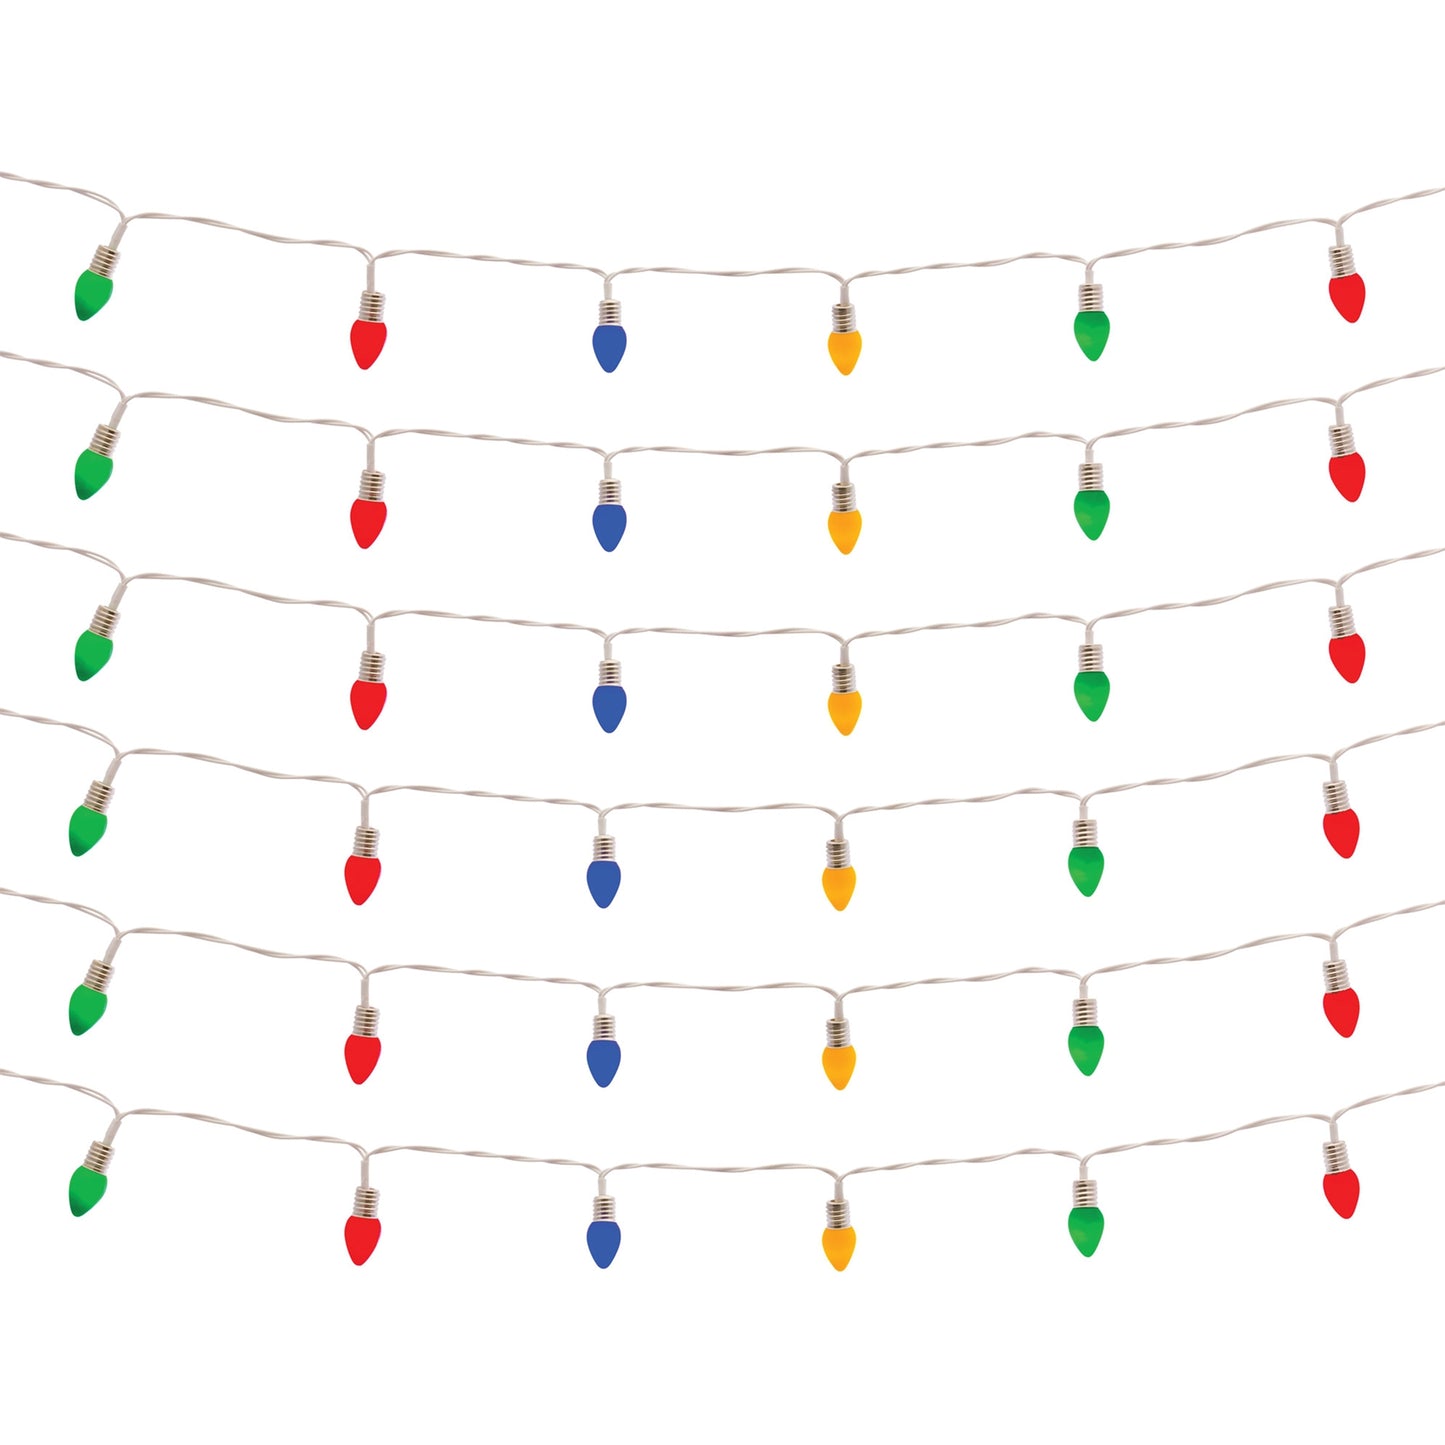 LED Lighted Strand with Classic Bulb Design (Set of 6 Strands)